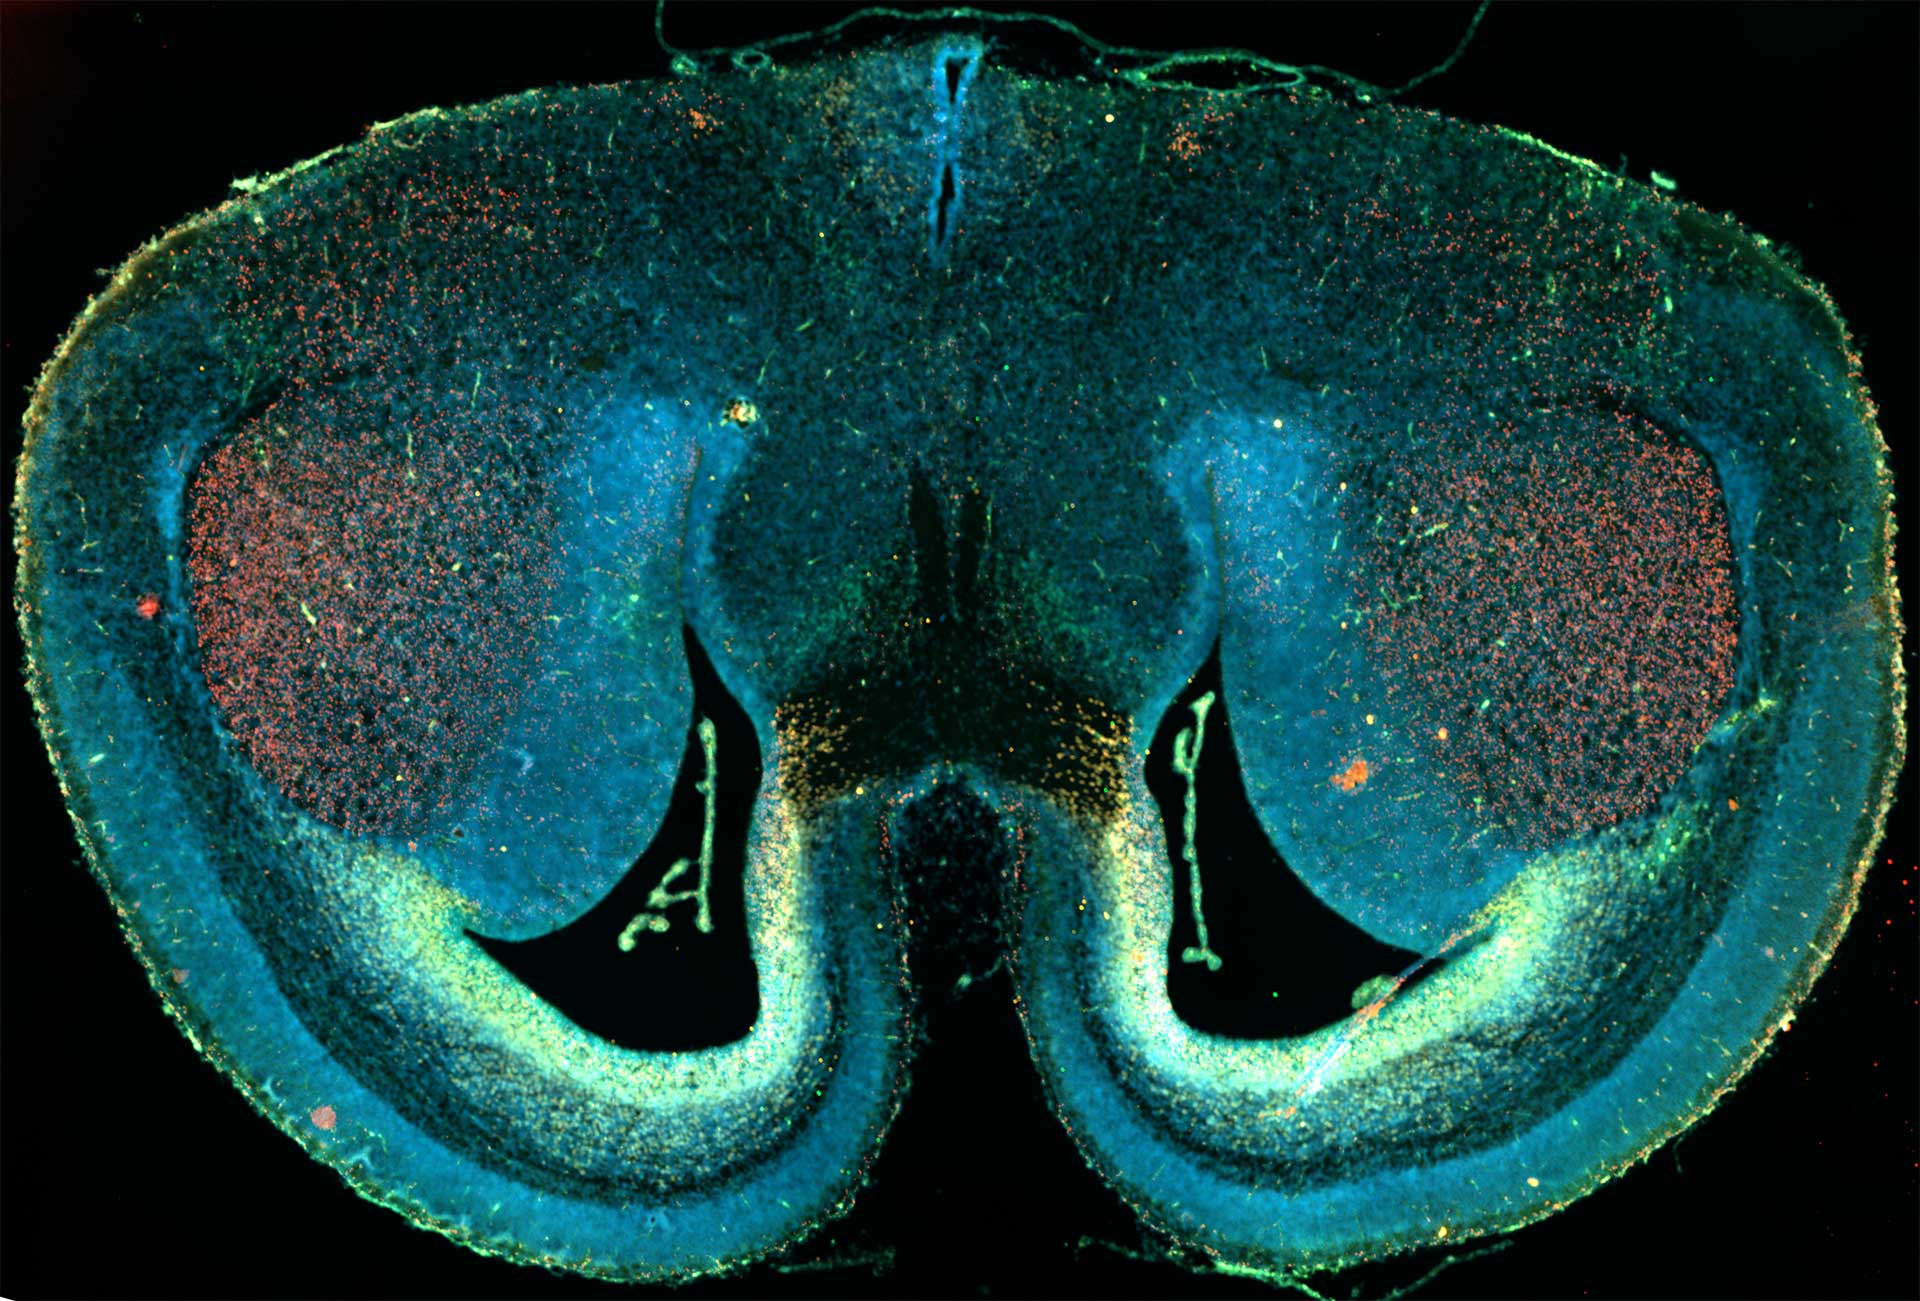 Mouse brain slice, captured using widefield fluorescence microscopy and tiling. Sample courtesy of D. Mi, School of Life Sciences, Tsinghua University, China